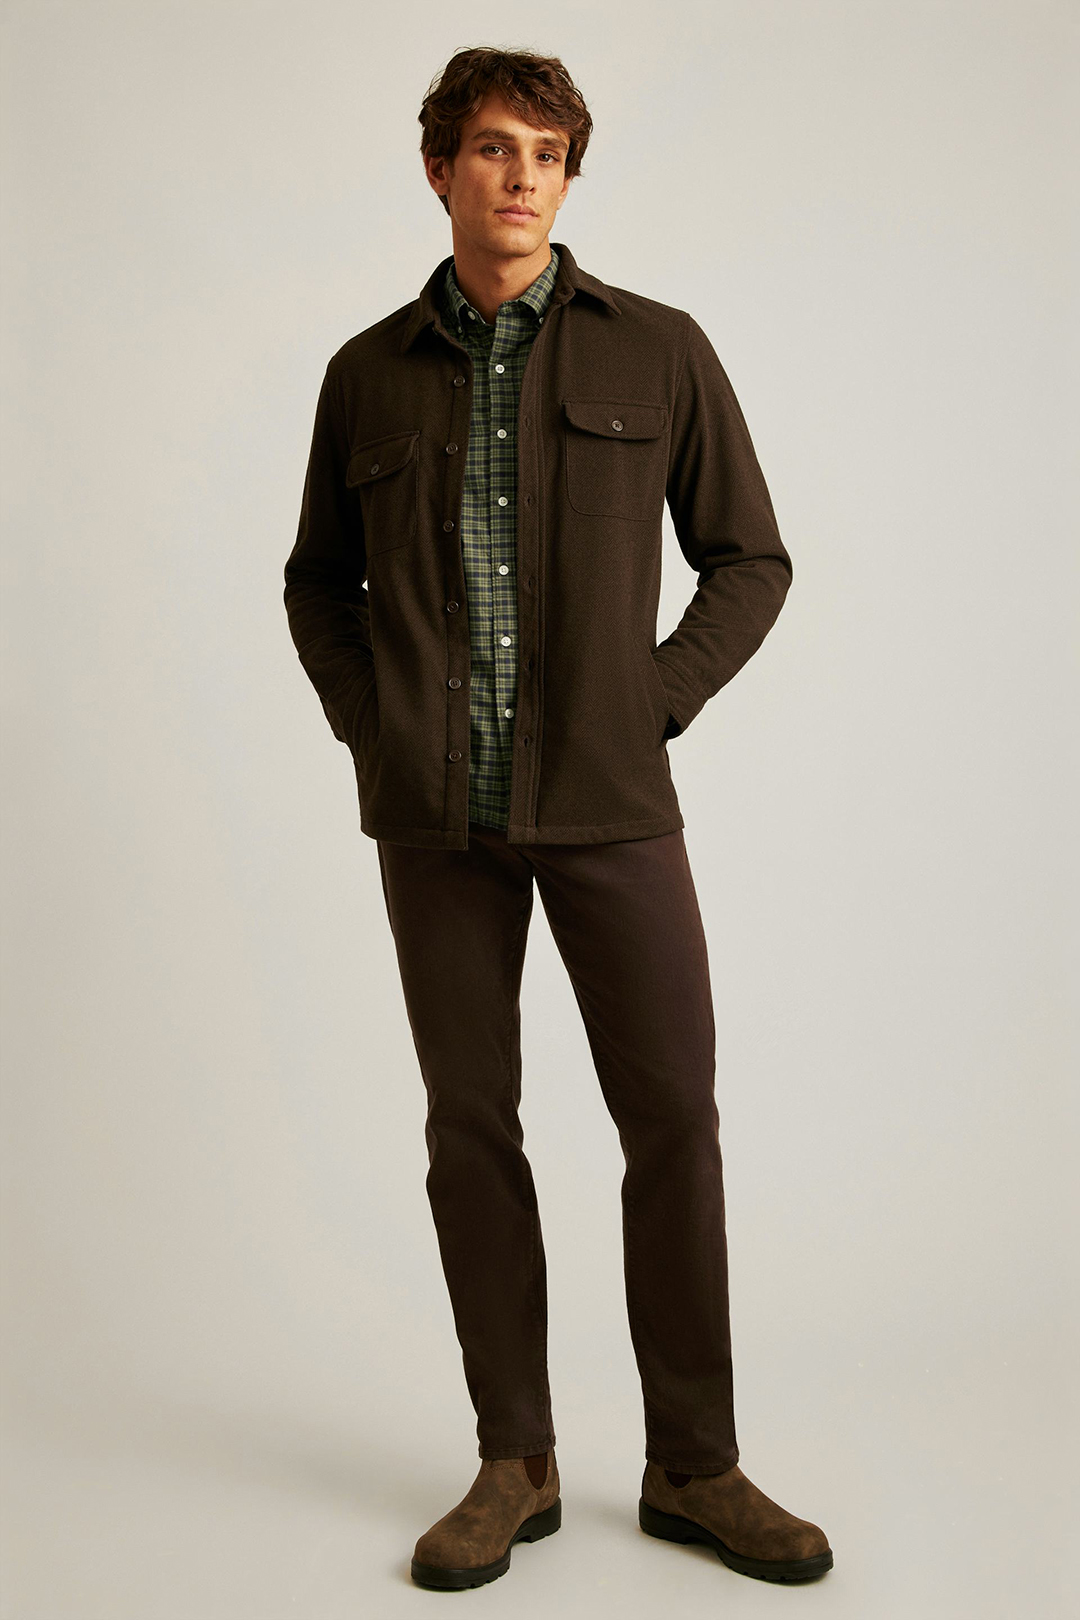 Wearing a brown overshirt, green plaid shirt, brown jeans, and brown suede Chelsea boots